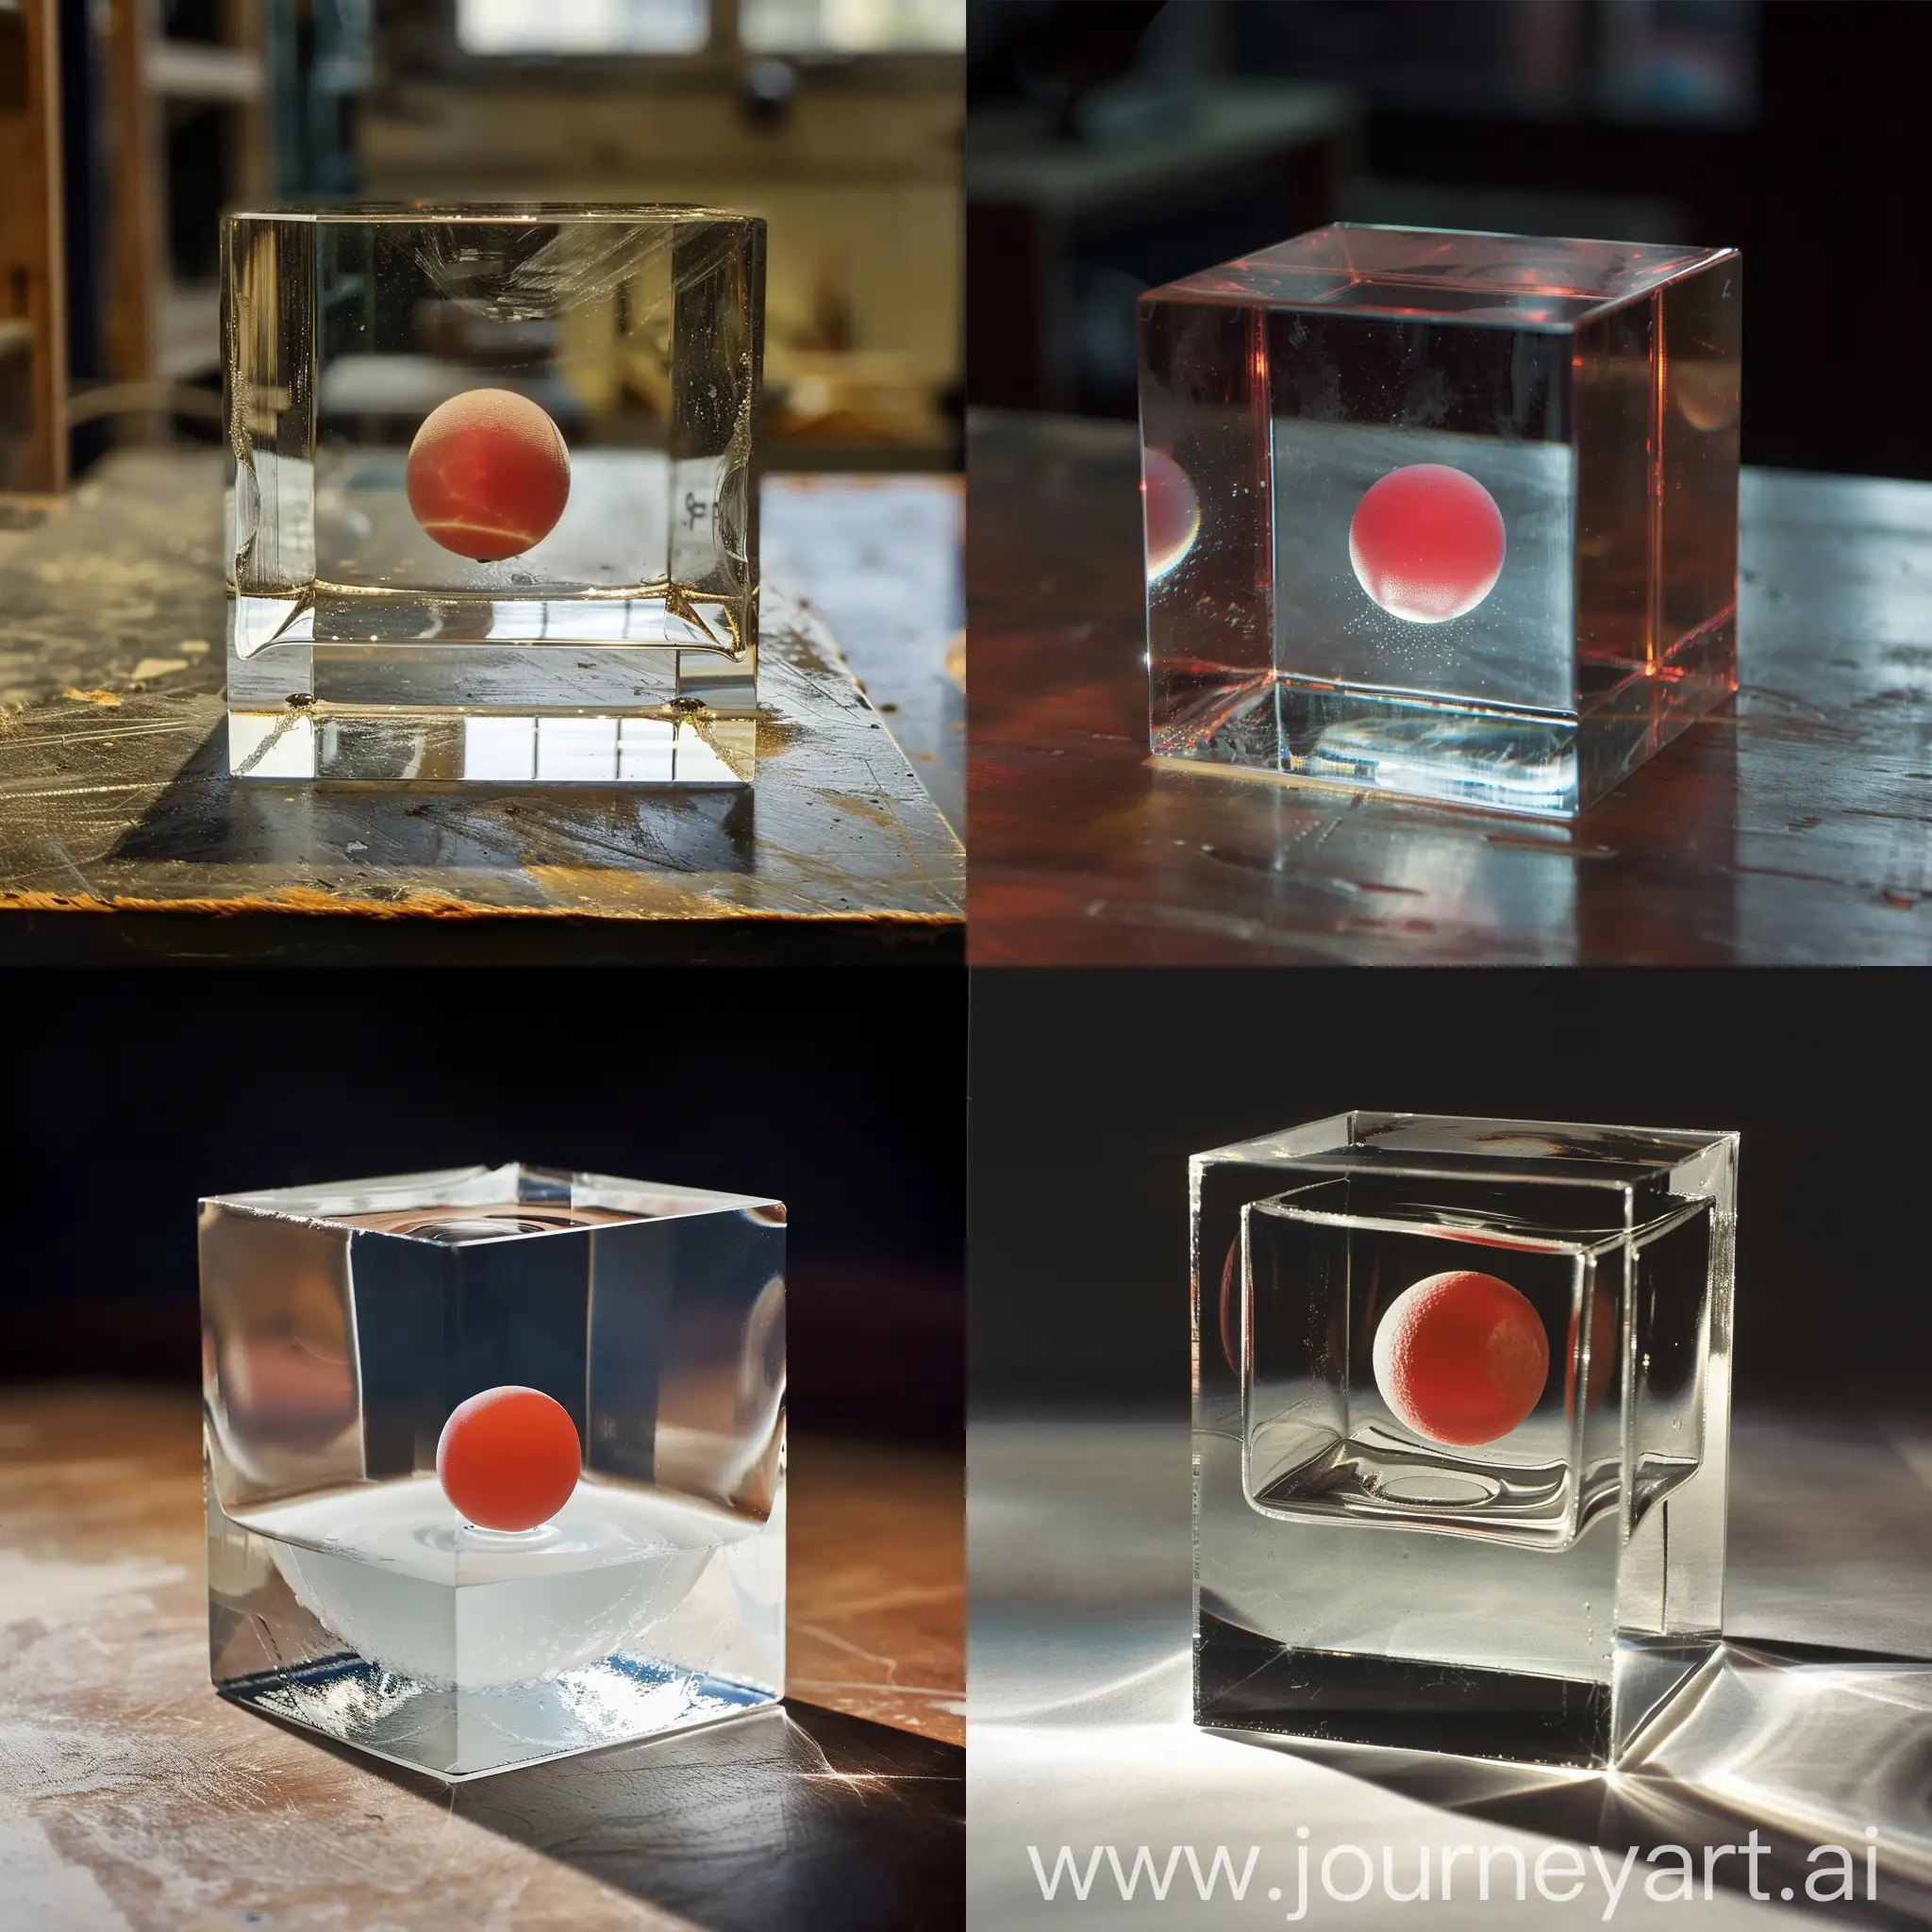 ping pong ball in a glass cube experiment